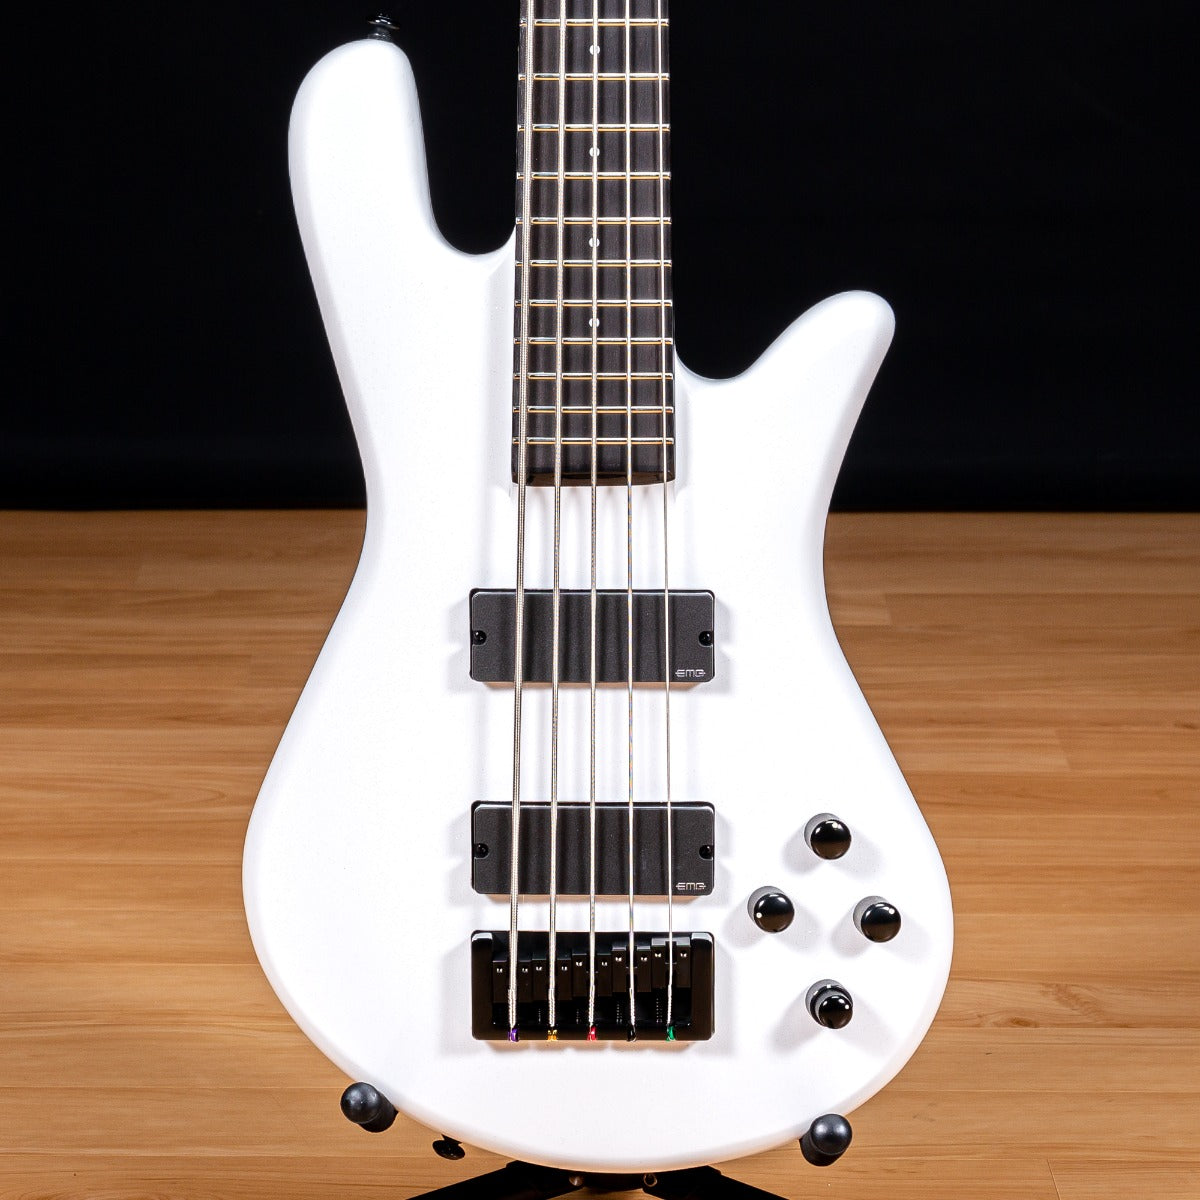 Spector NS Ethos HP 5 Bass Guitar - White Sparkle Gloss view 1